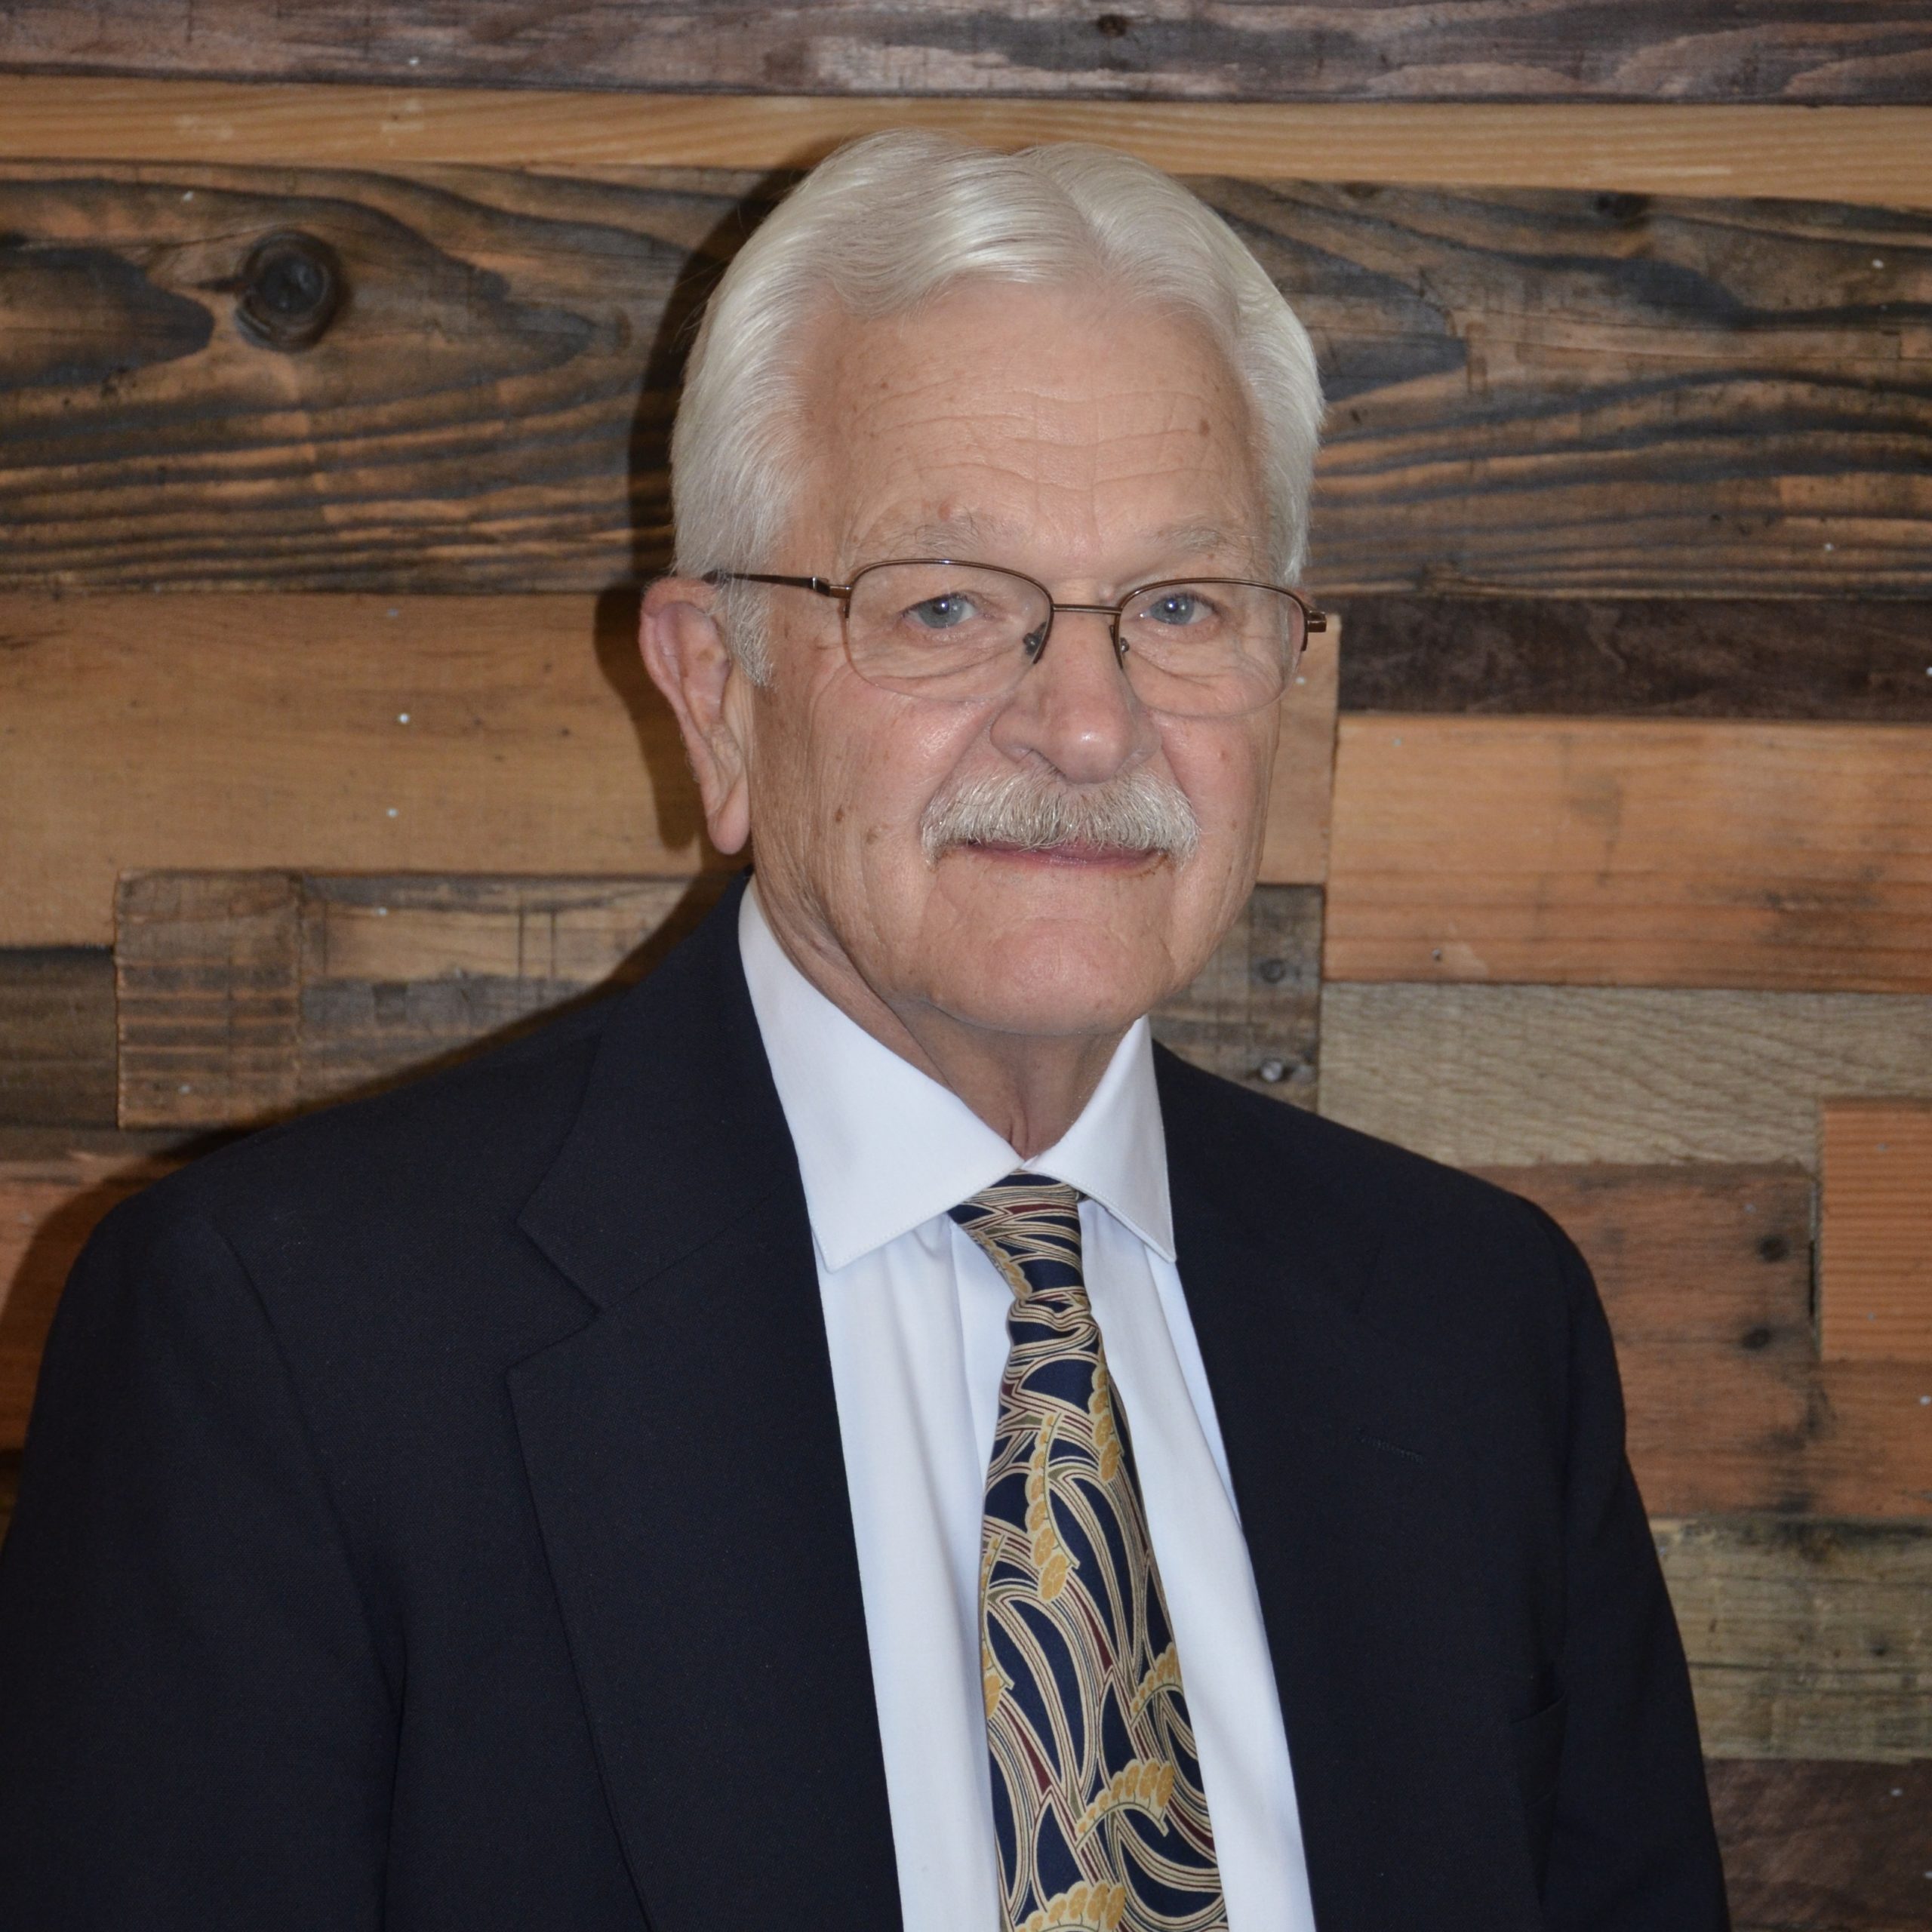 Jim Thwing - Legal Counsel, Business Administrator and Mission Director